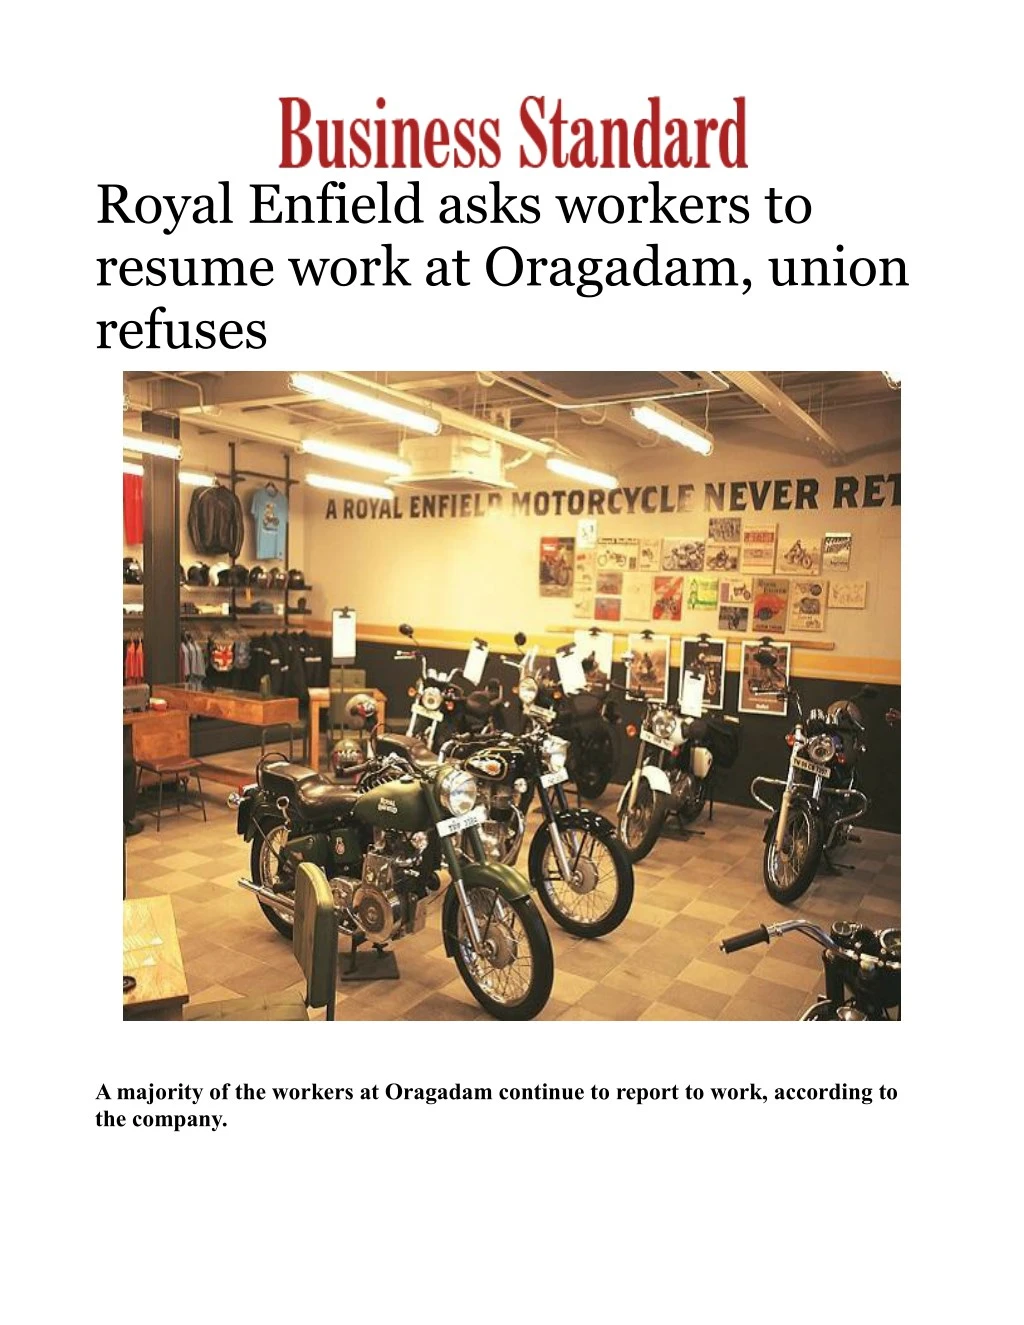 royal enfield asks workers to resume work